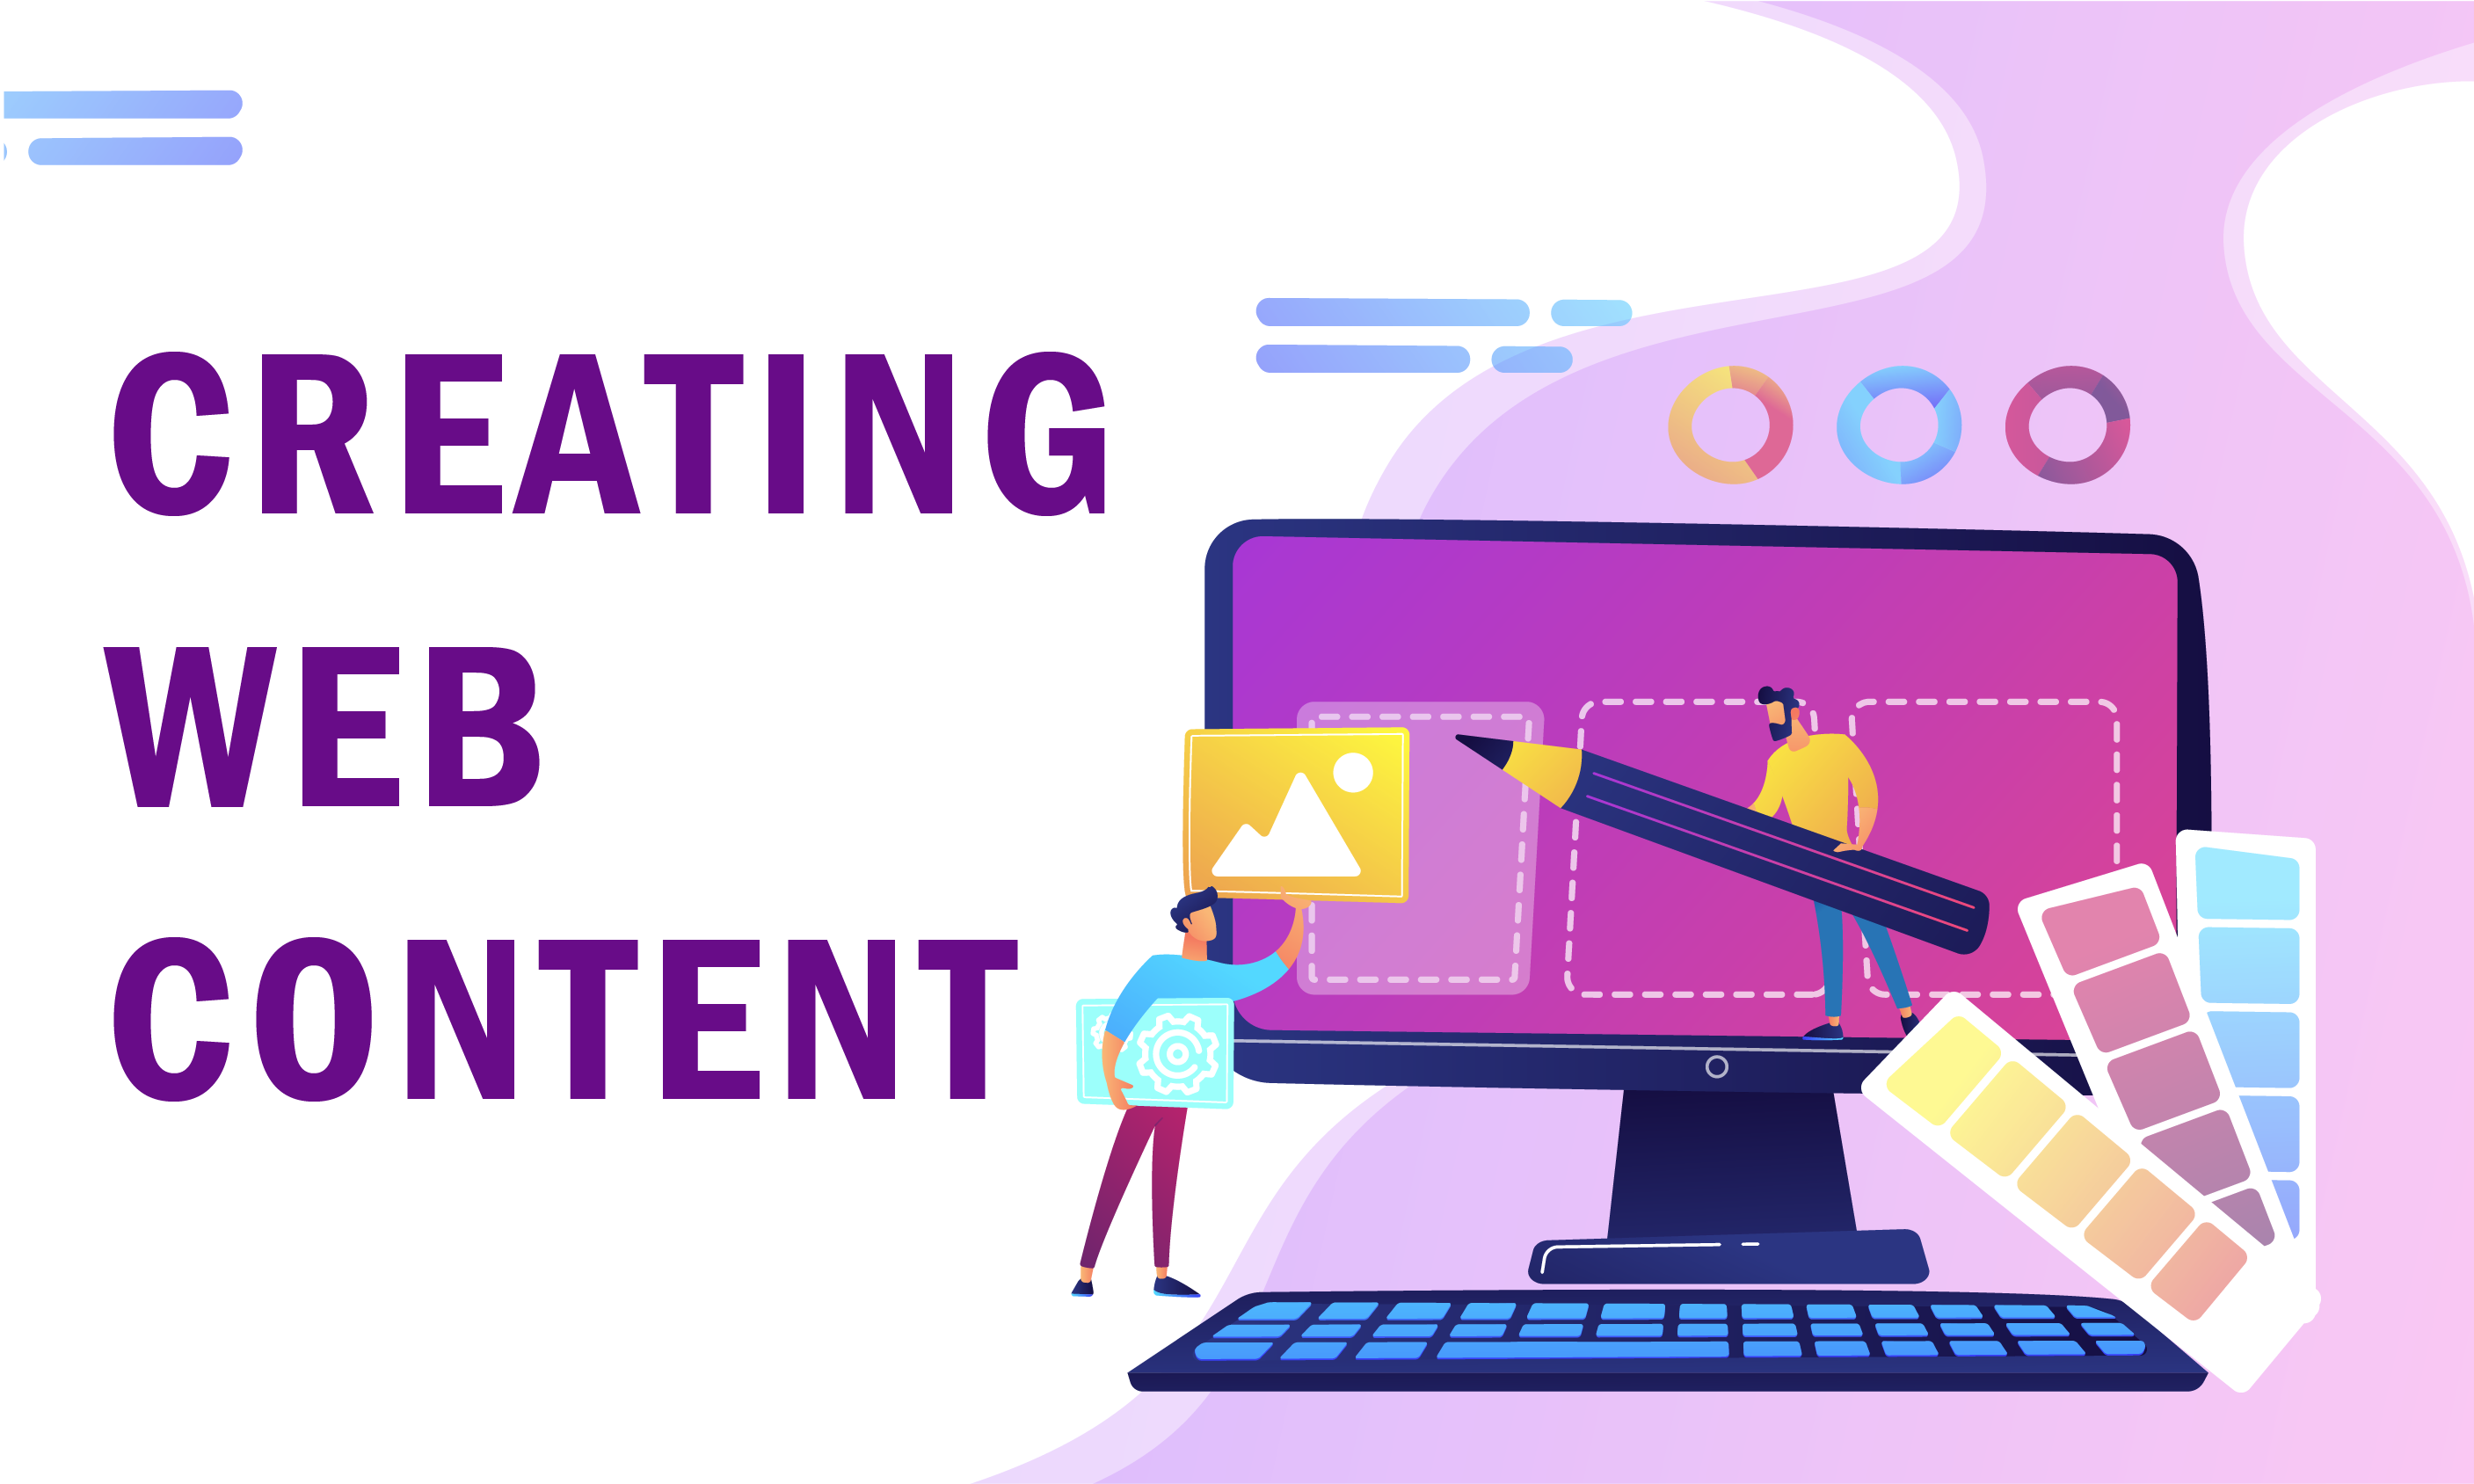 Creating Web Content